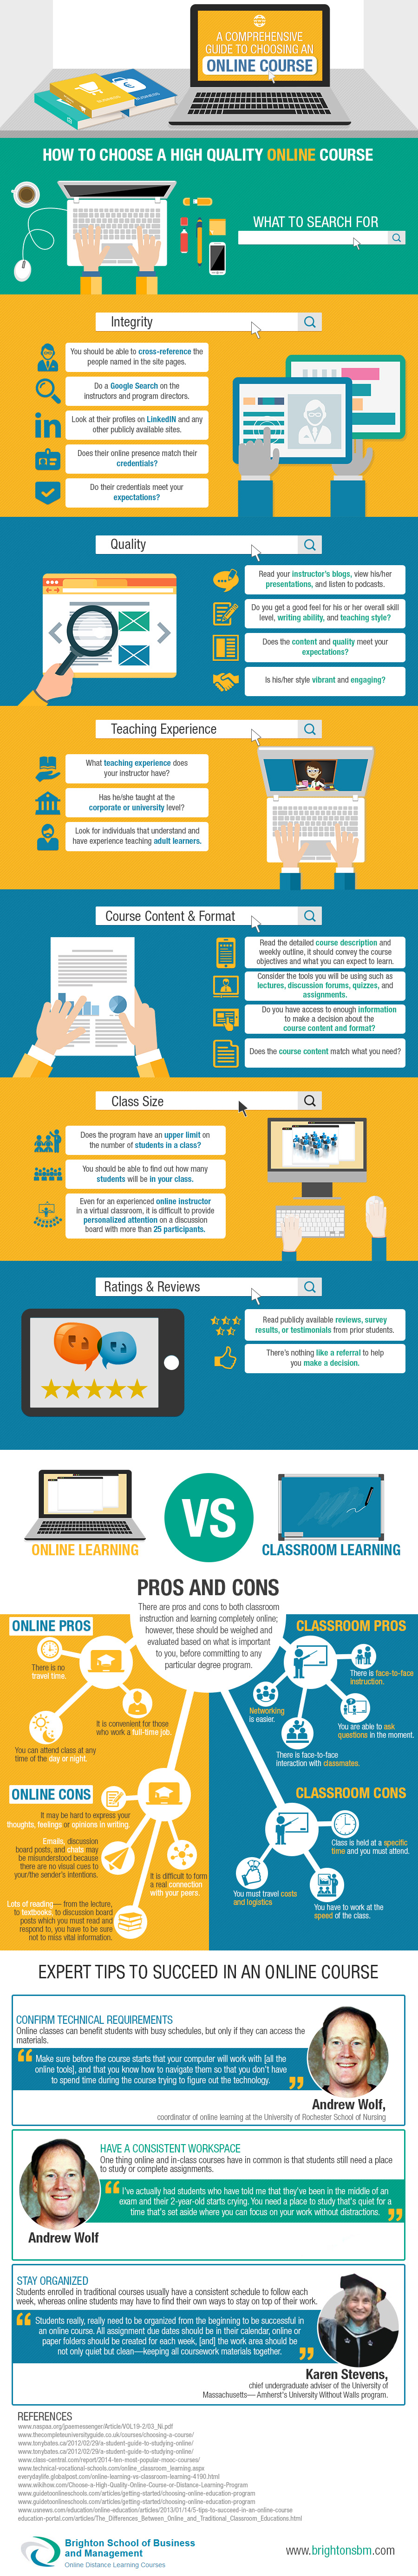 Infographic: ‘A comprehensive guide to choosing an online course’